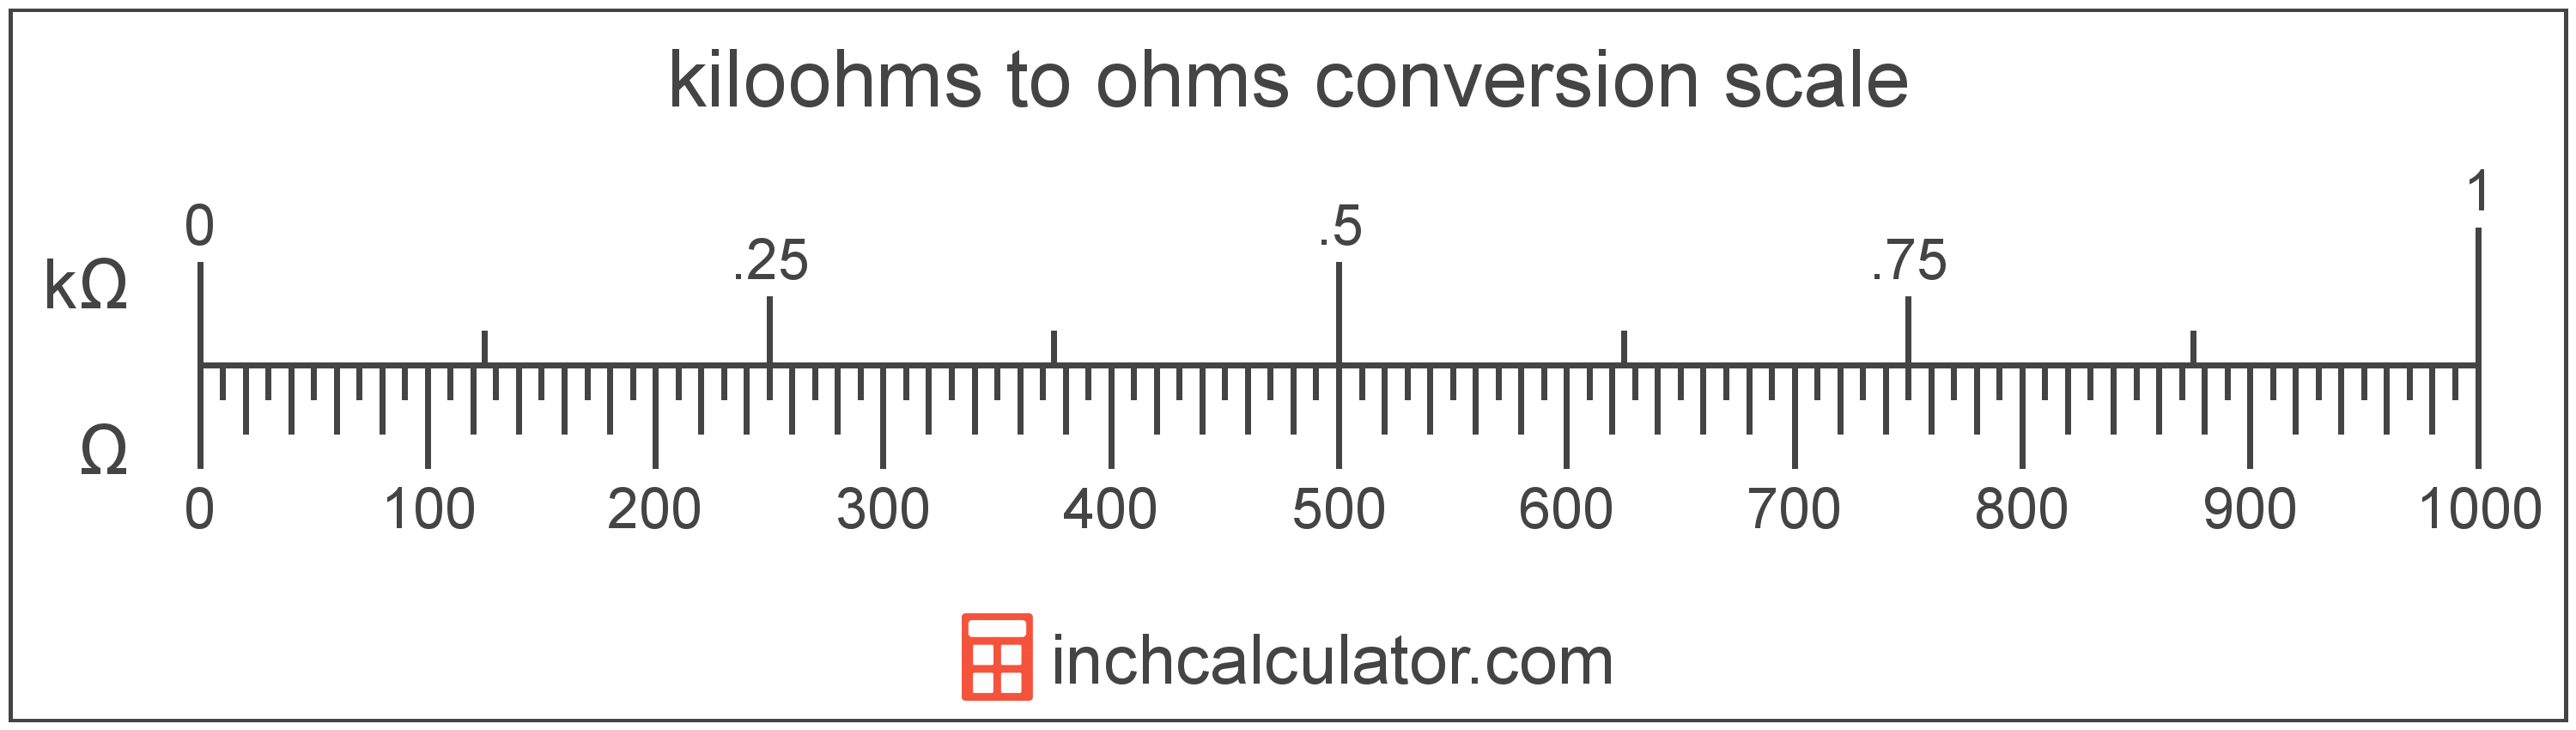 conversion scale showing kiloohms and equivalent ohms electrical resistance values